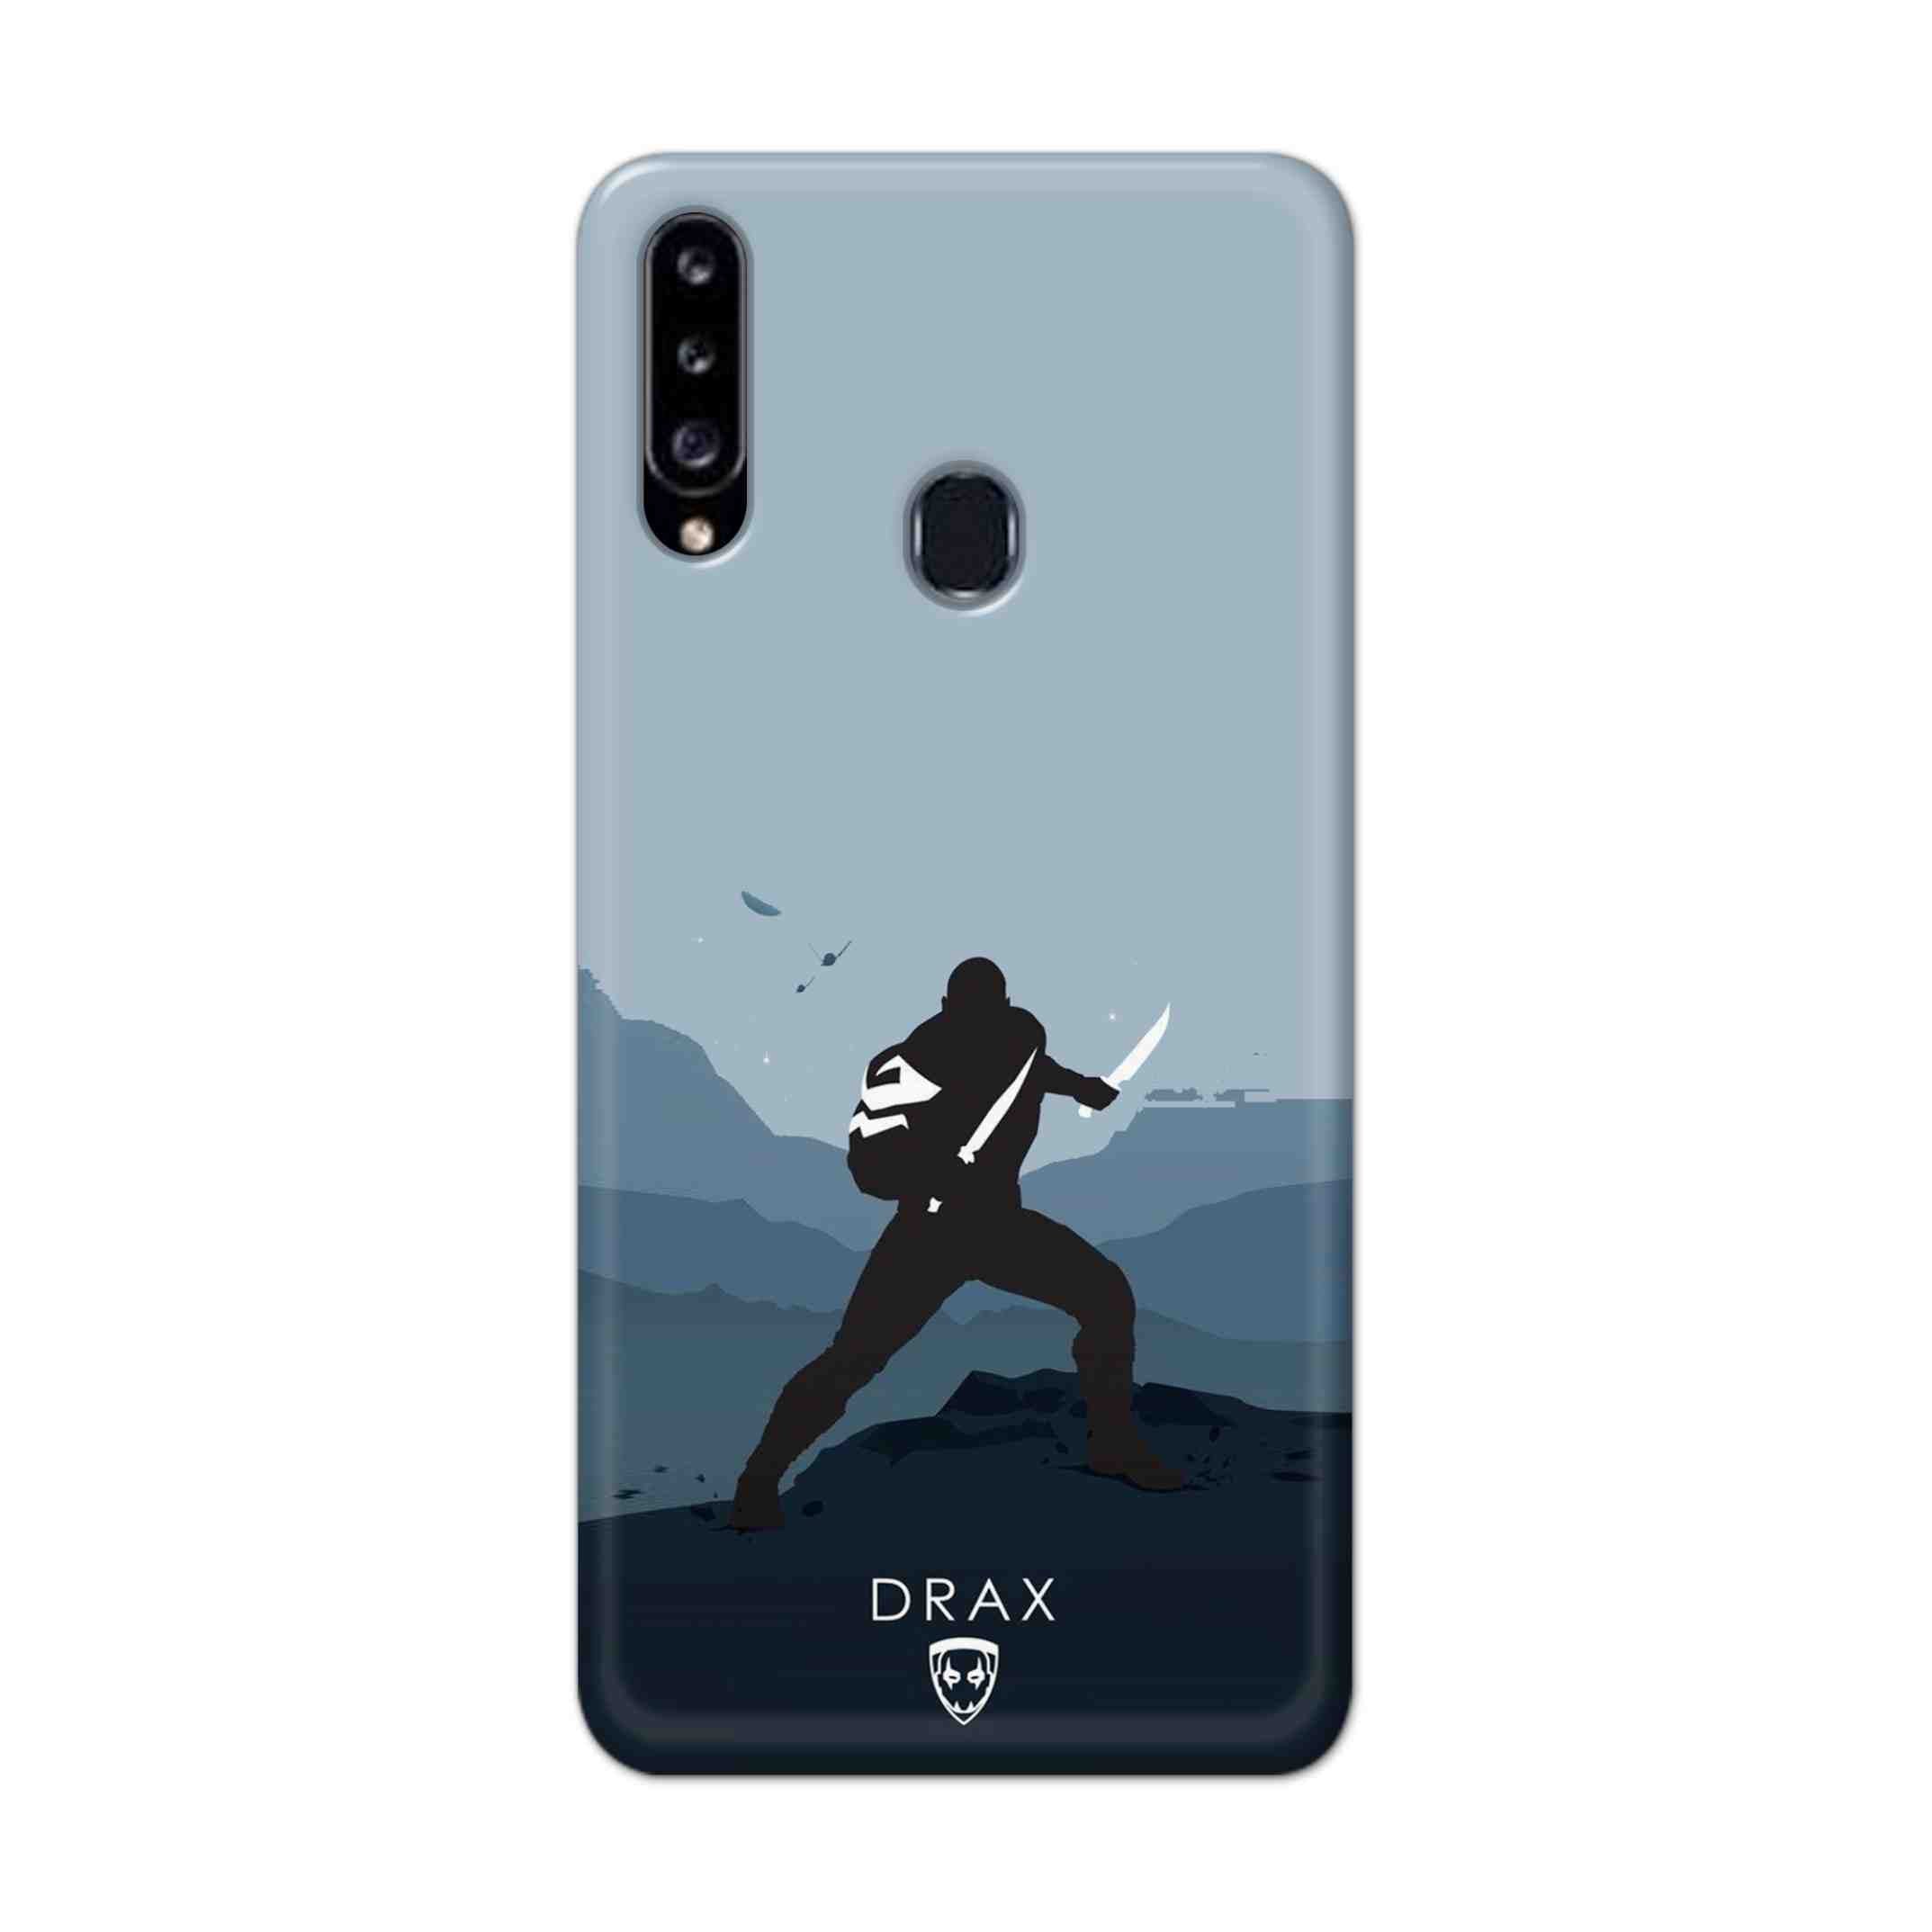 Buy Drax Hard Back Mobile Phone Case Cover For Samsung Galaxy A21 Online